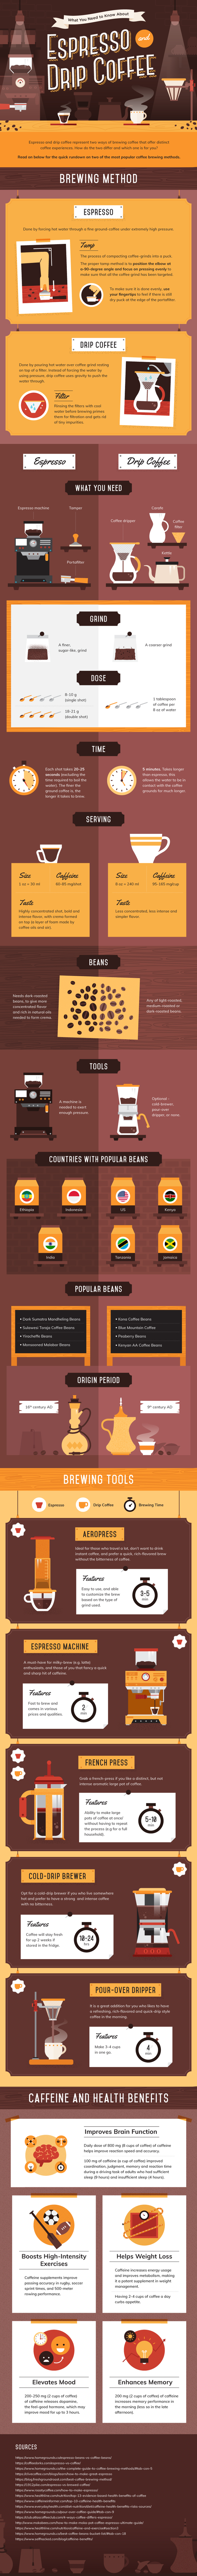 Infographic for What You Need to Know About Espresso and Drip Coffee